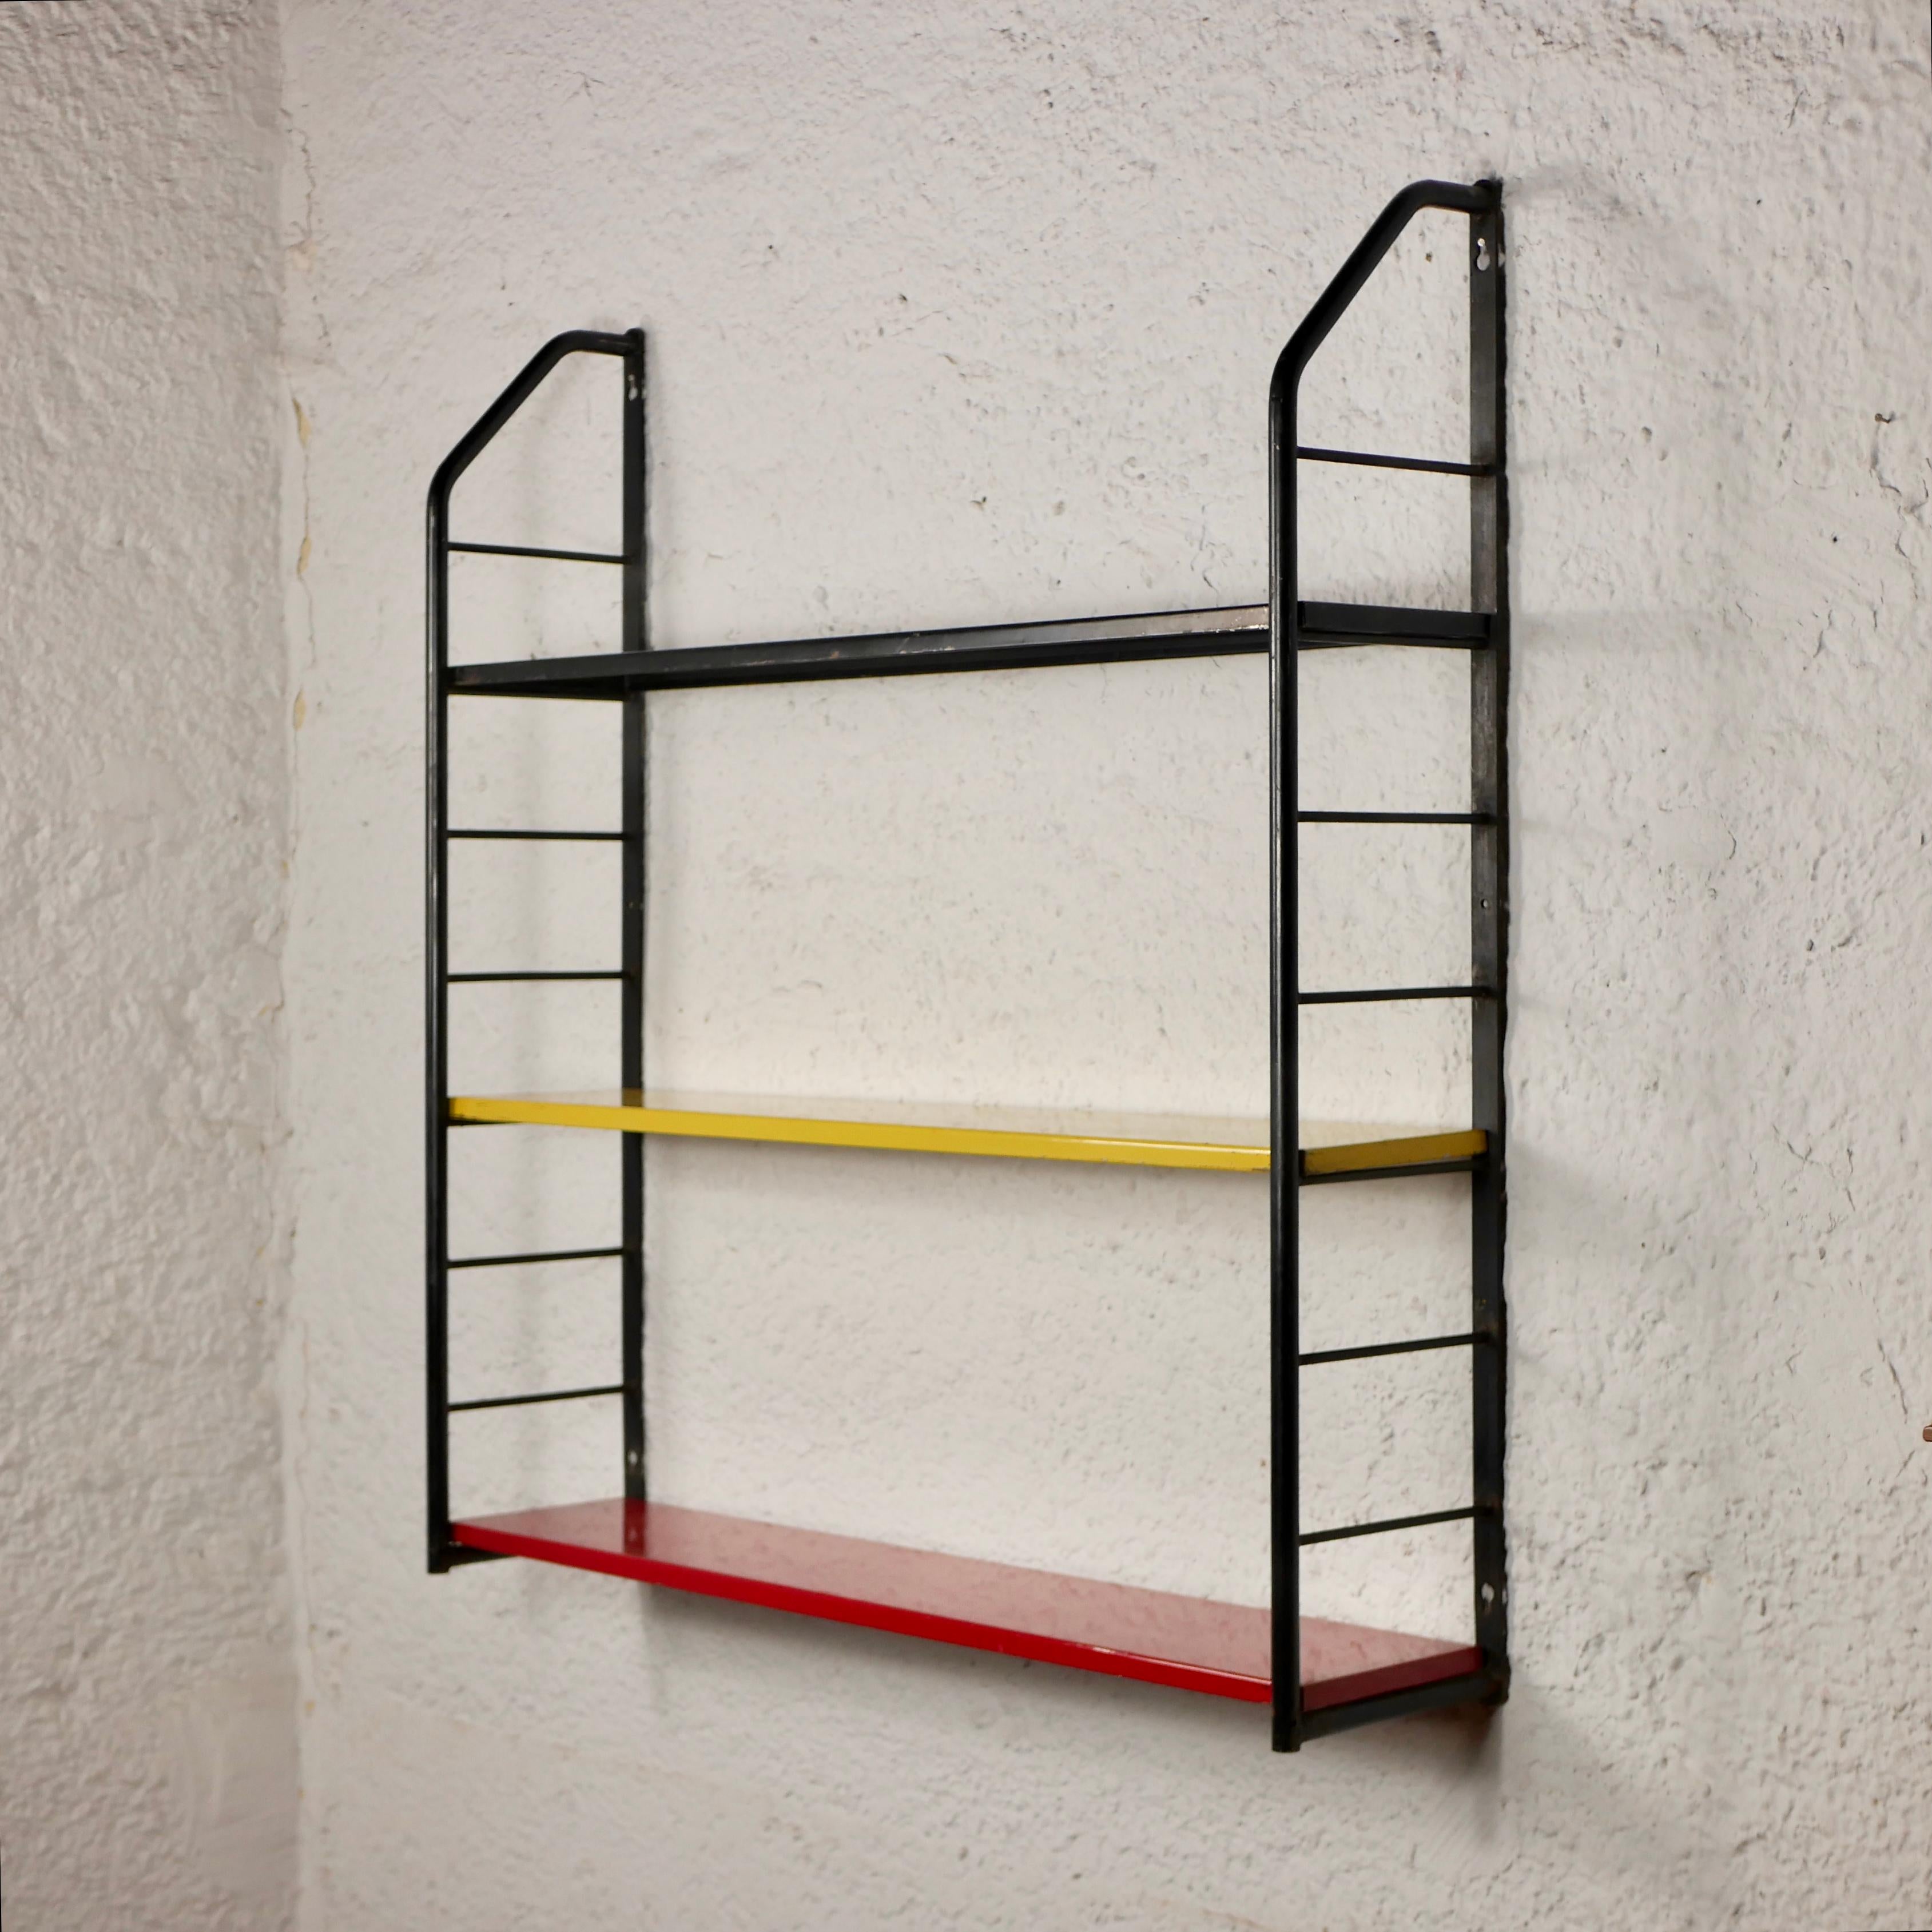 Dutch Large Multicolored Wall Unit Shelves from Holland, 1970s